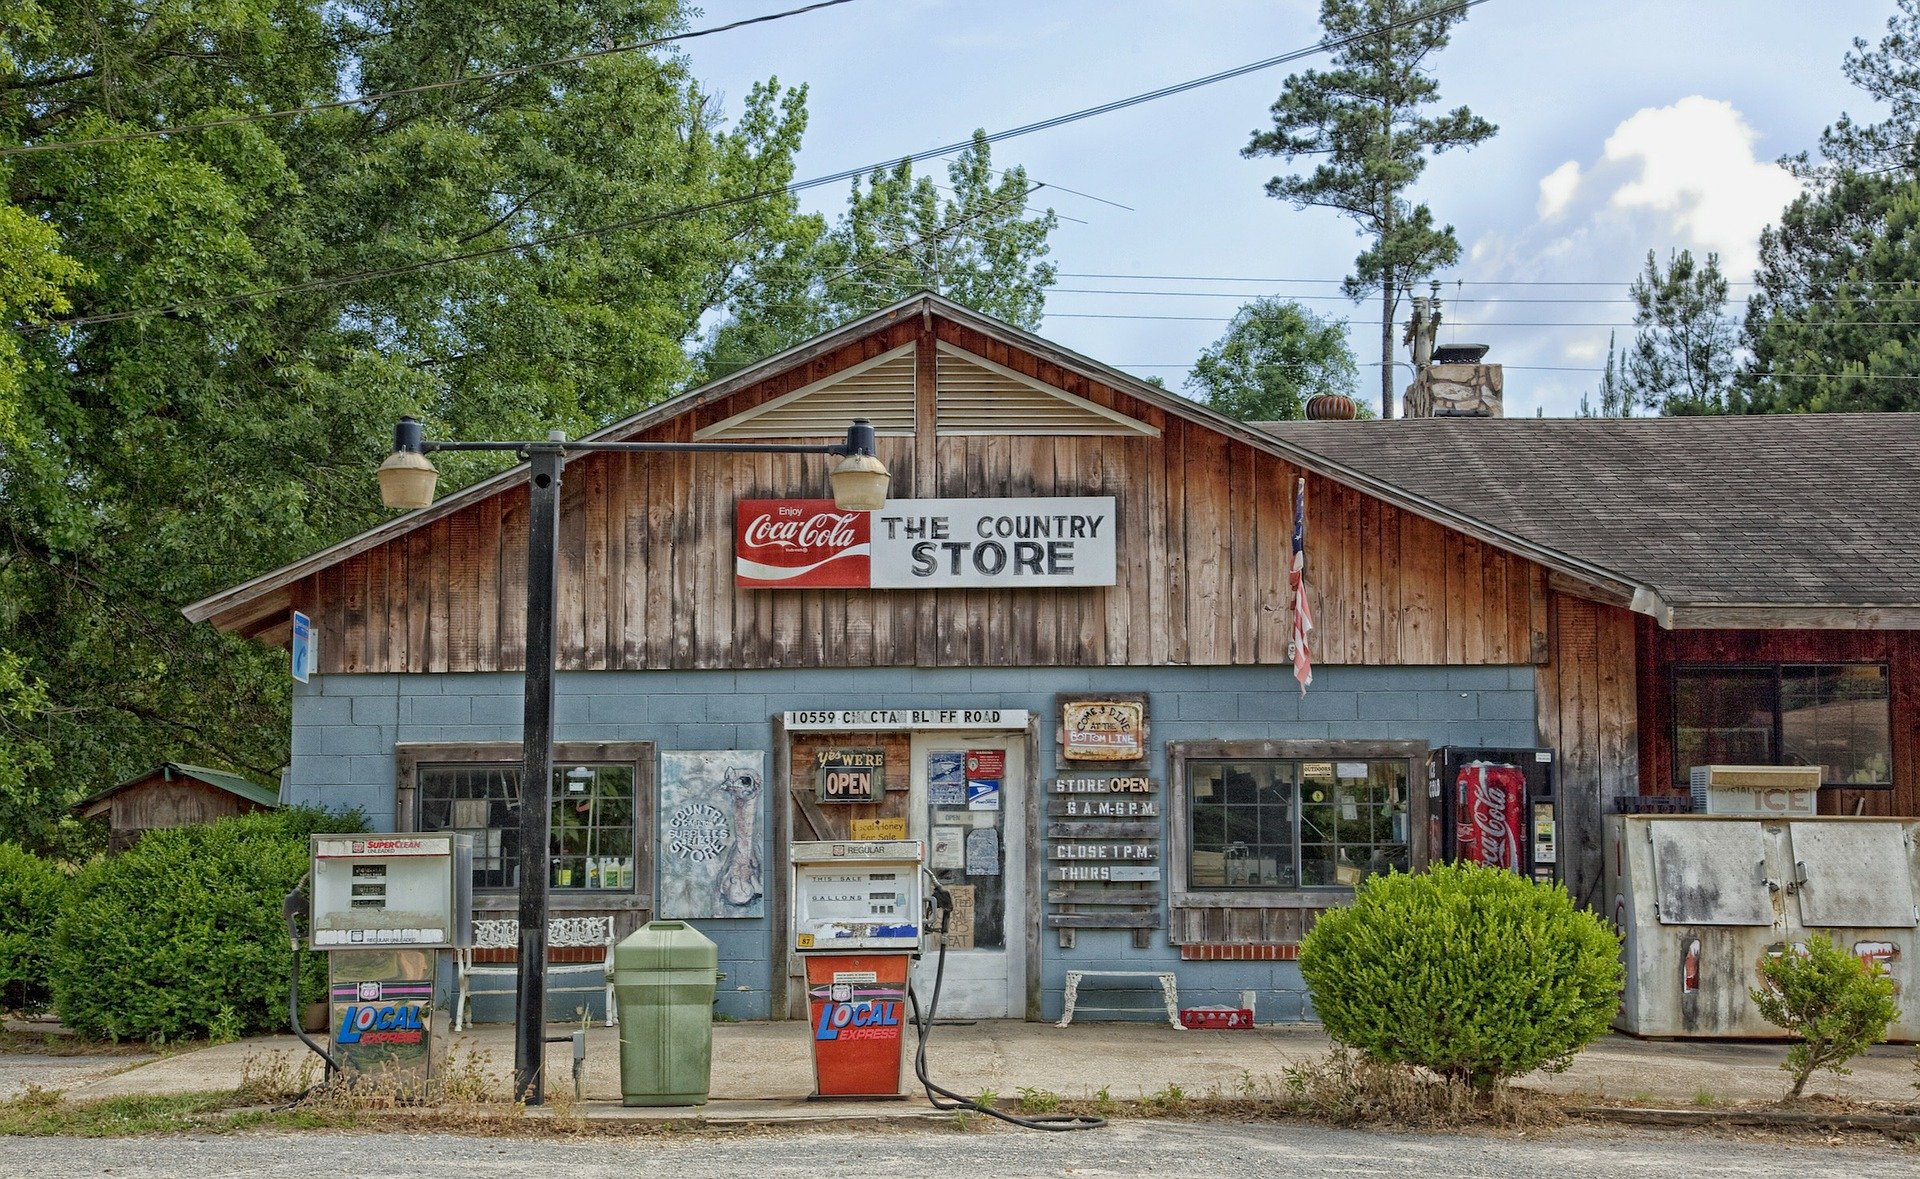 Old time general store representing the basic retail model built on relationships